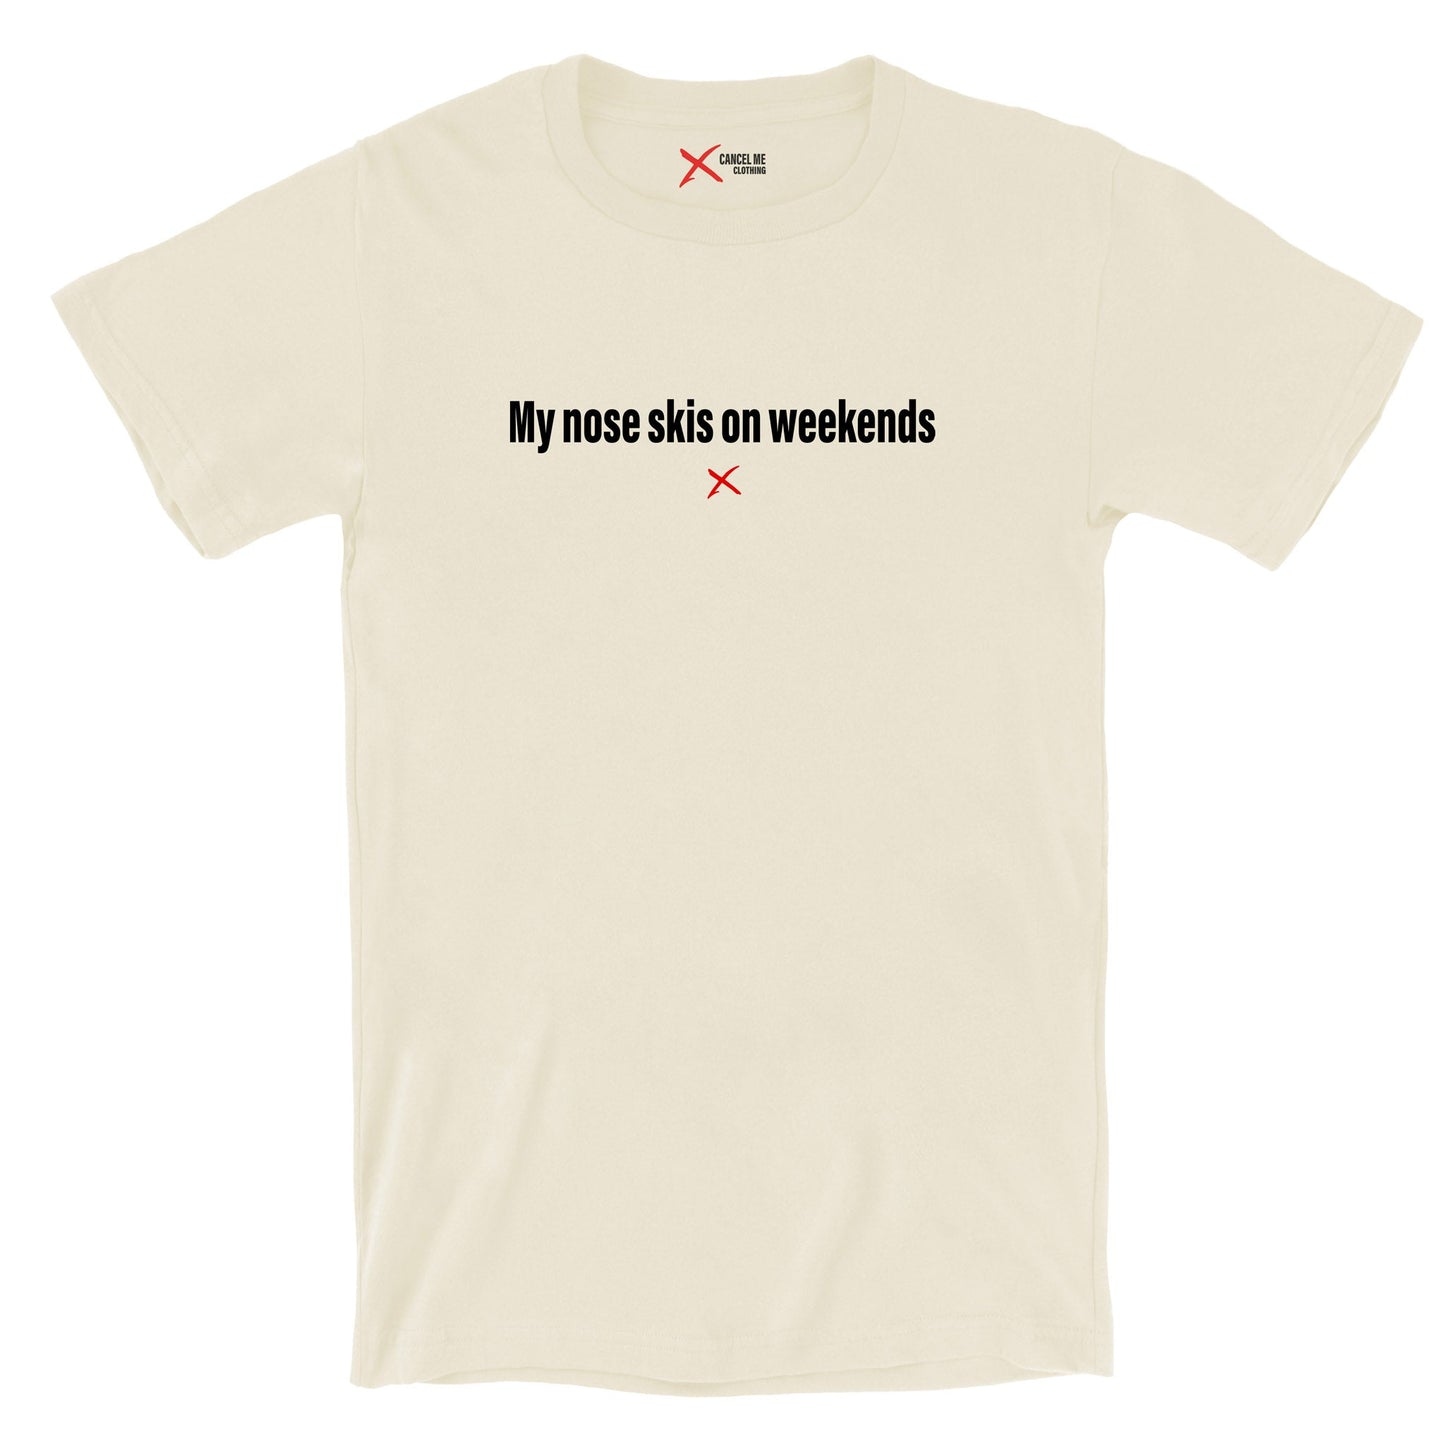 My nose skis on weekends - Shirt